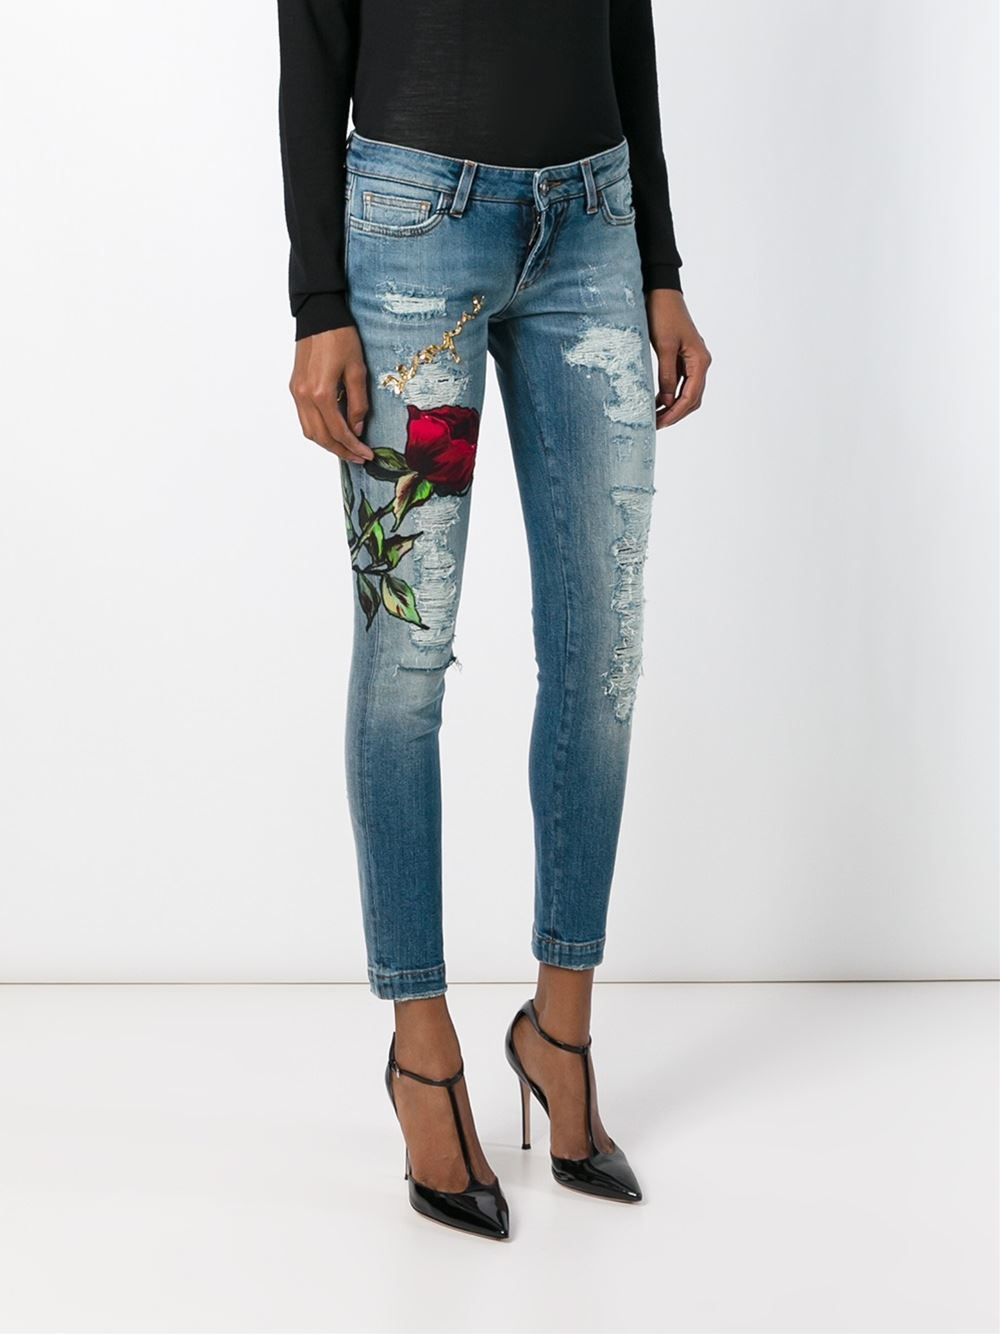 Lyst - Dolce & Gabbana Rose Appliqué Ripped Jeans in Blue